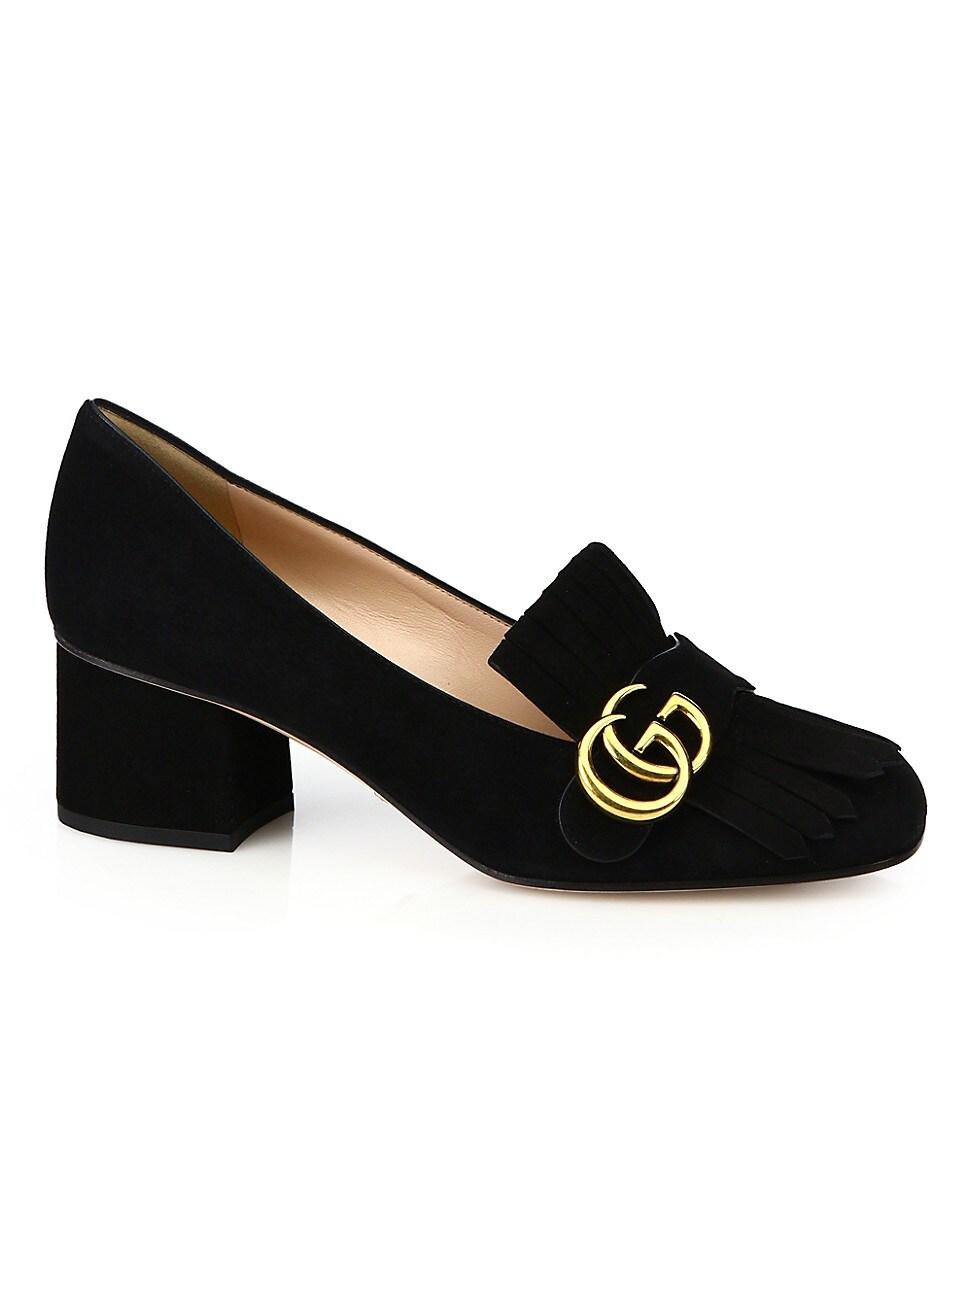 Gucci Marmont Leather Pumps in Purple | Lyst